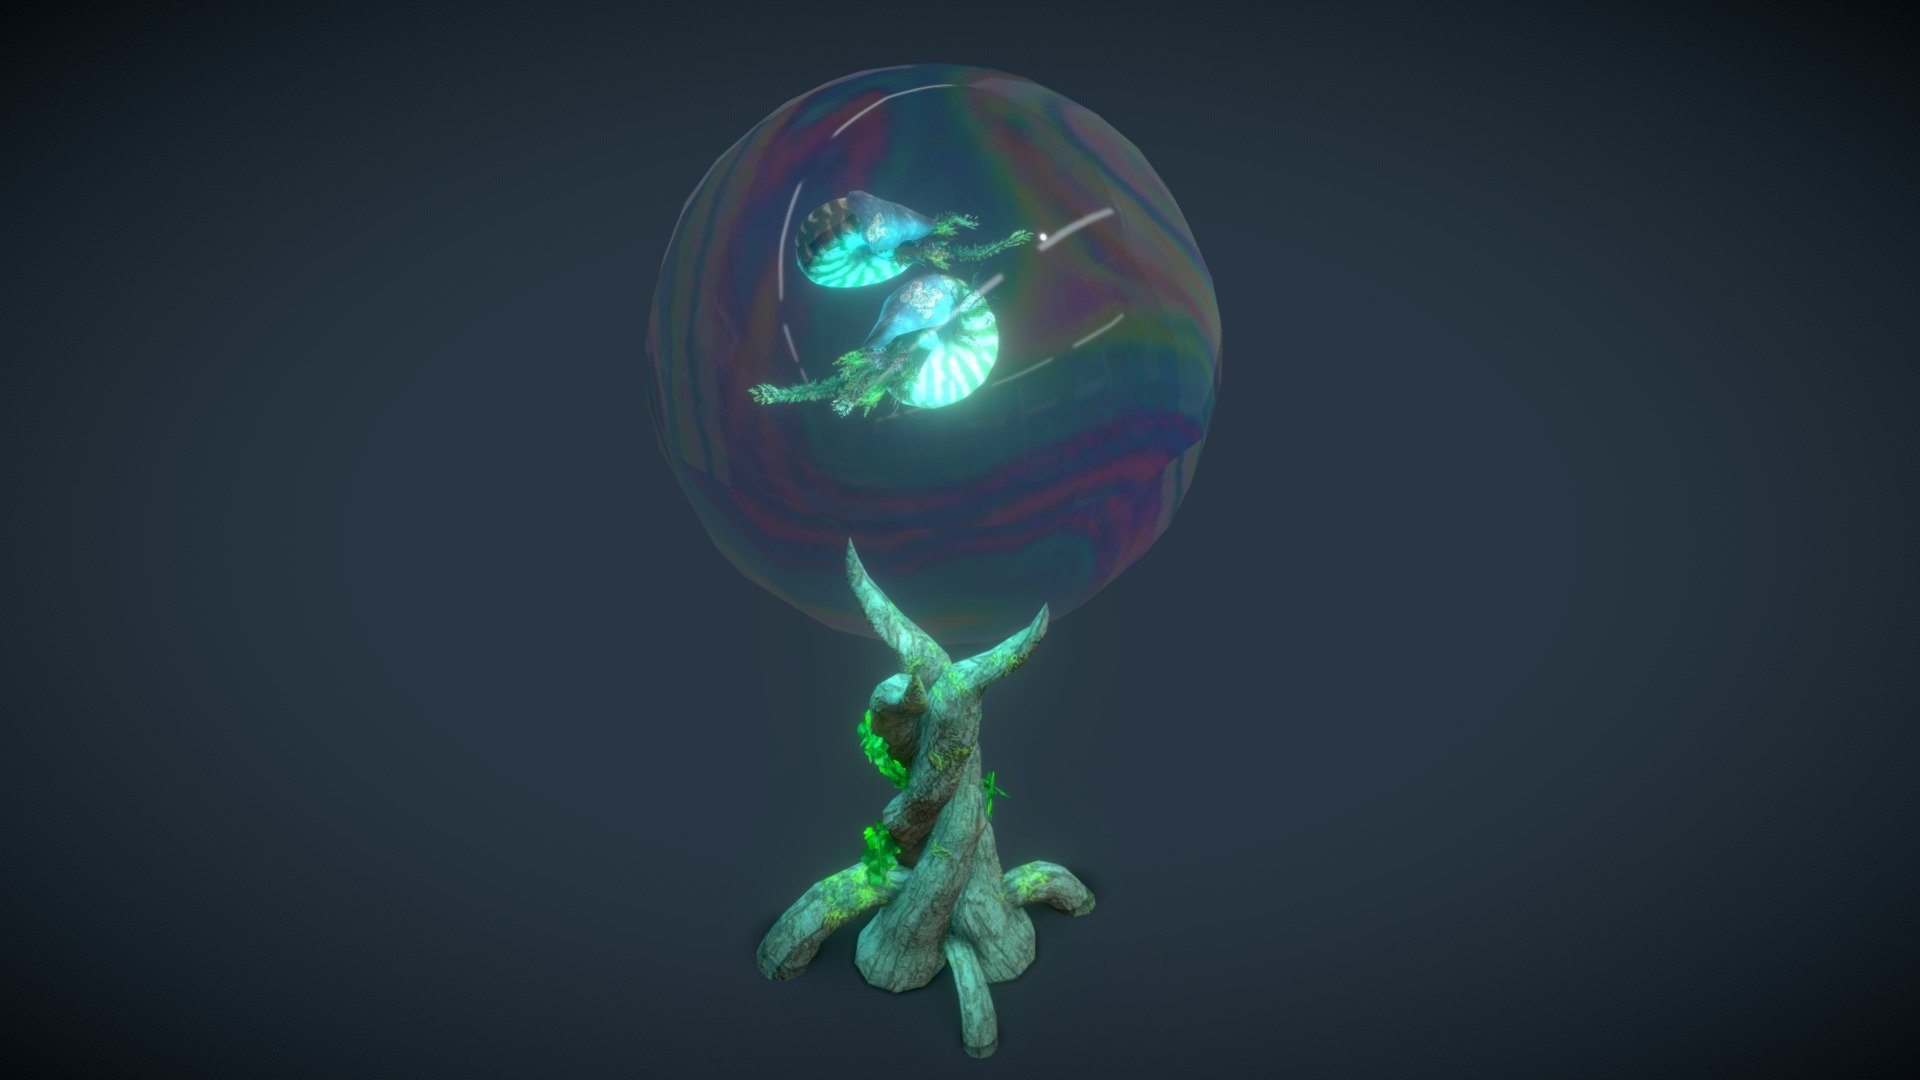 Another piece of the Koldovstoretz scene
There are two Nautilus made of plants in their bubble tank.
everything was made with Maya 2018

You can see screenshot of the full scene here:
https://www.artstation.com/artwork/xzl6xO - Vegetal nautilus - Download Free 3D model by Hephep 3d model